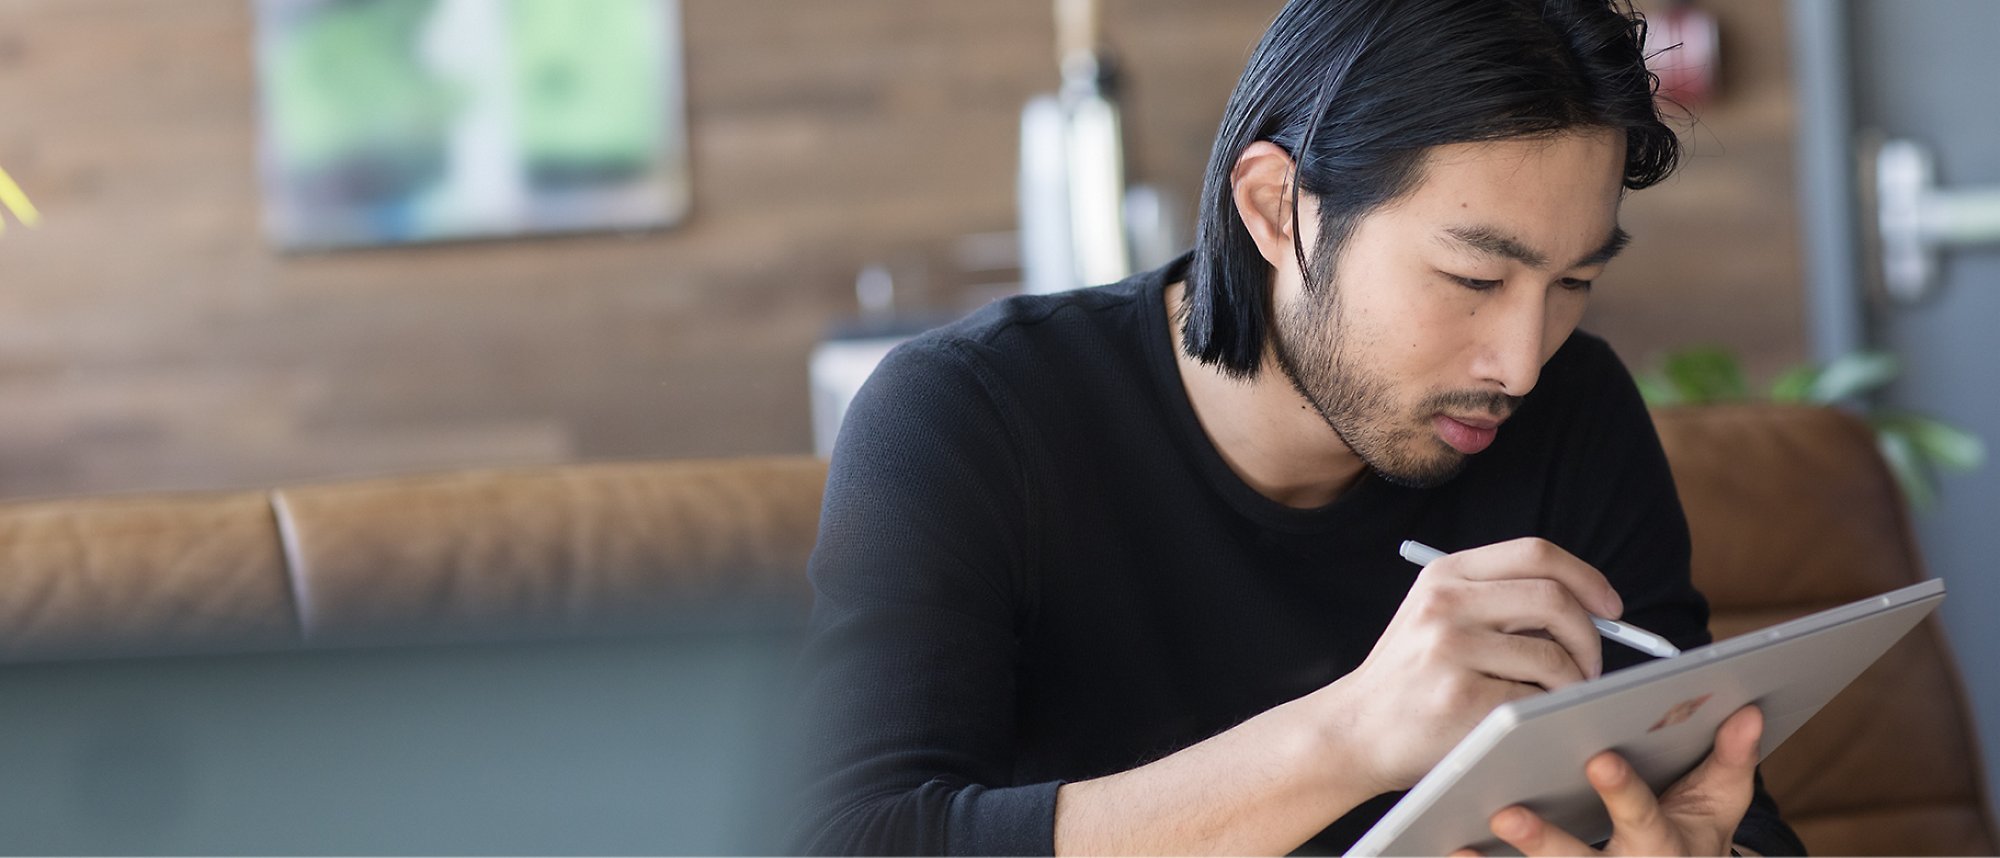 A person using stylus with his surface pro